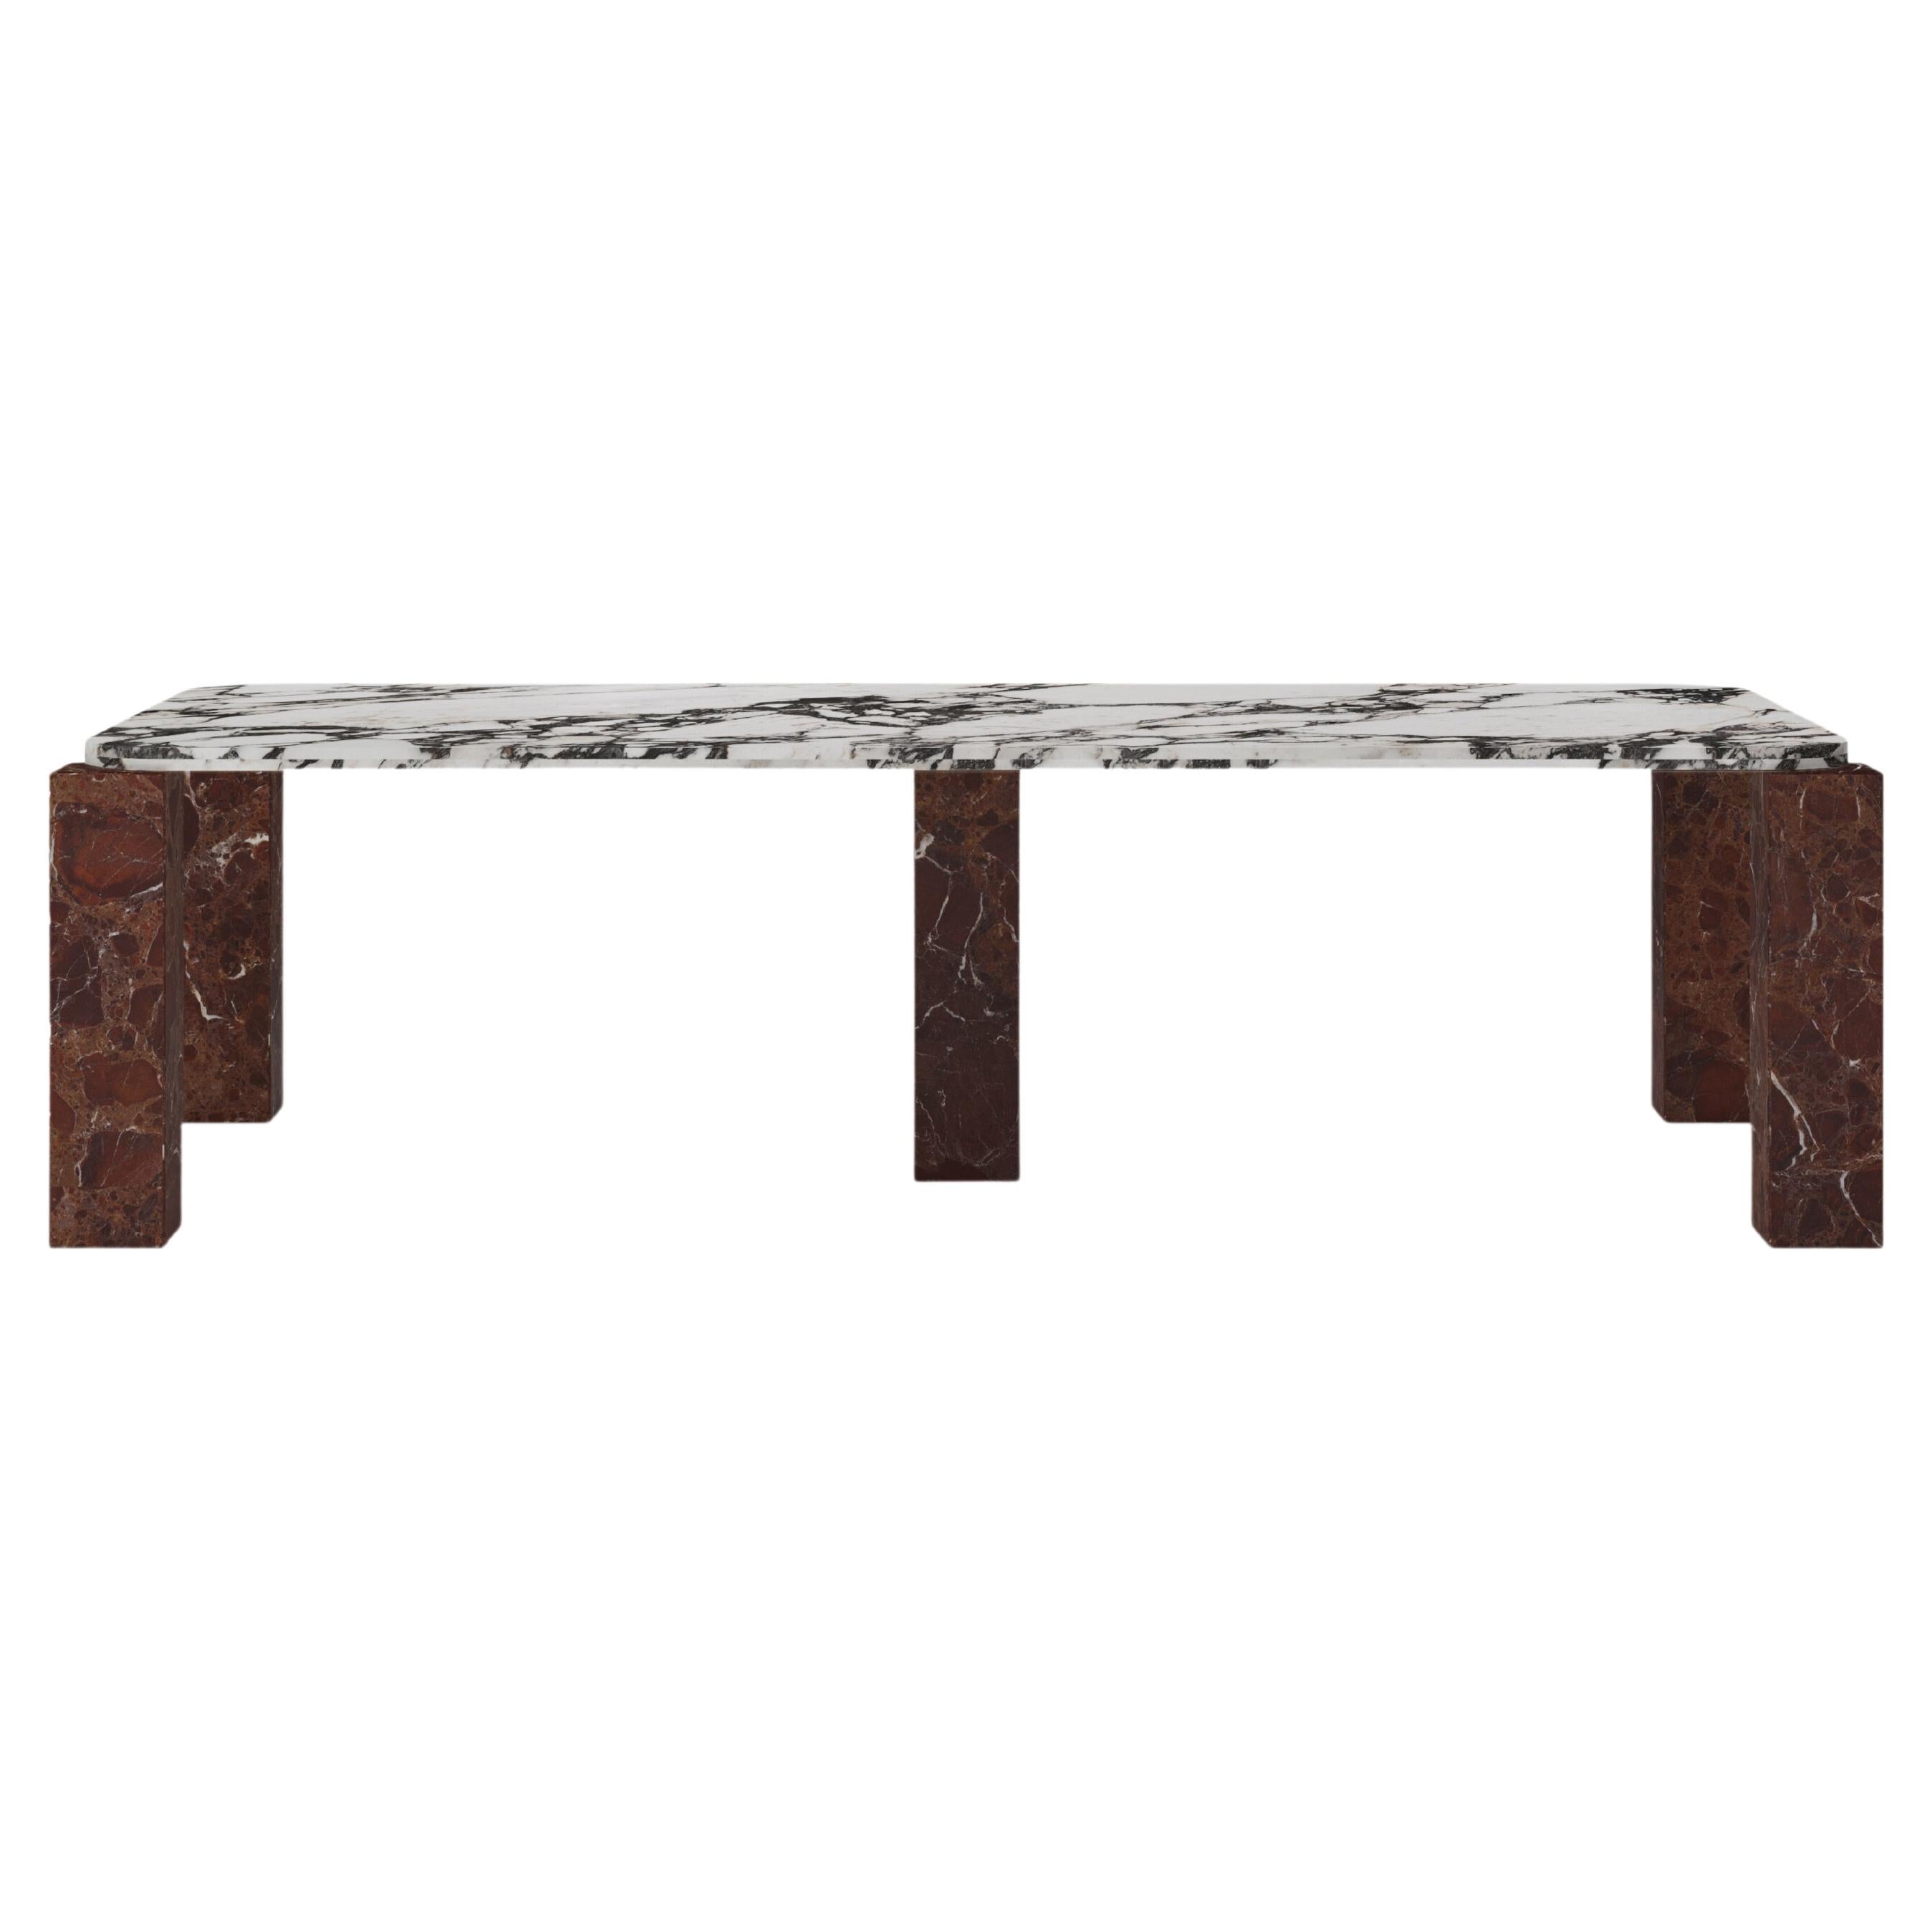 FORM(LA) Cubo Rectangle Dining Table 110”L x 50”W x 30”H Viola & Rosso Marble For Sale